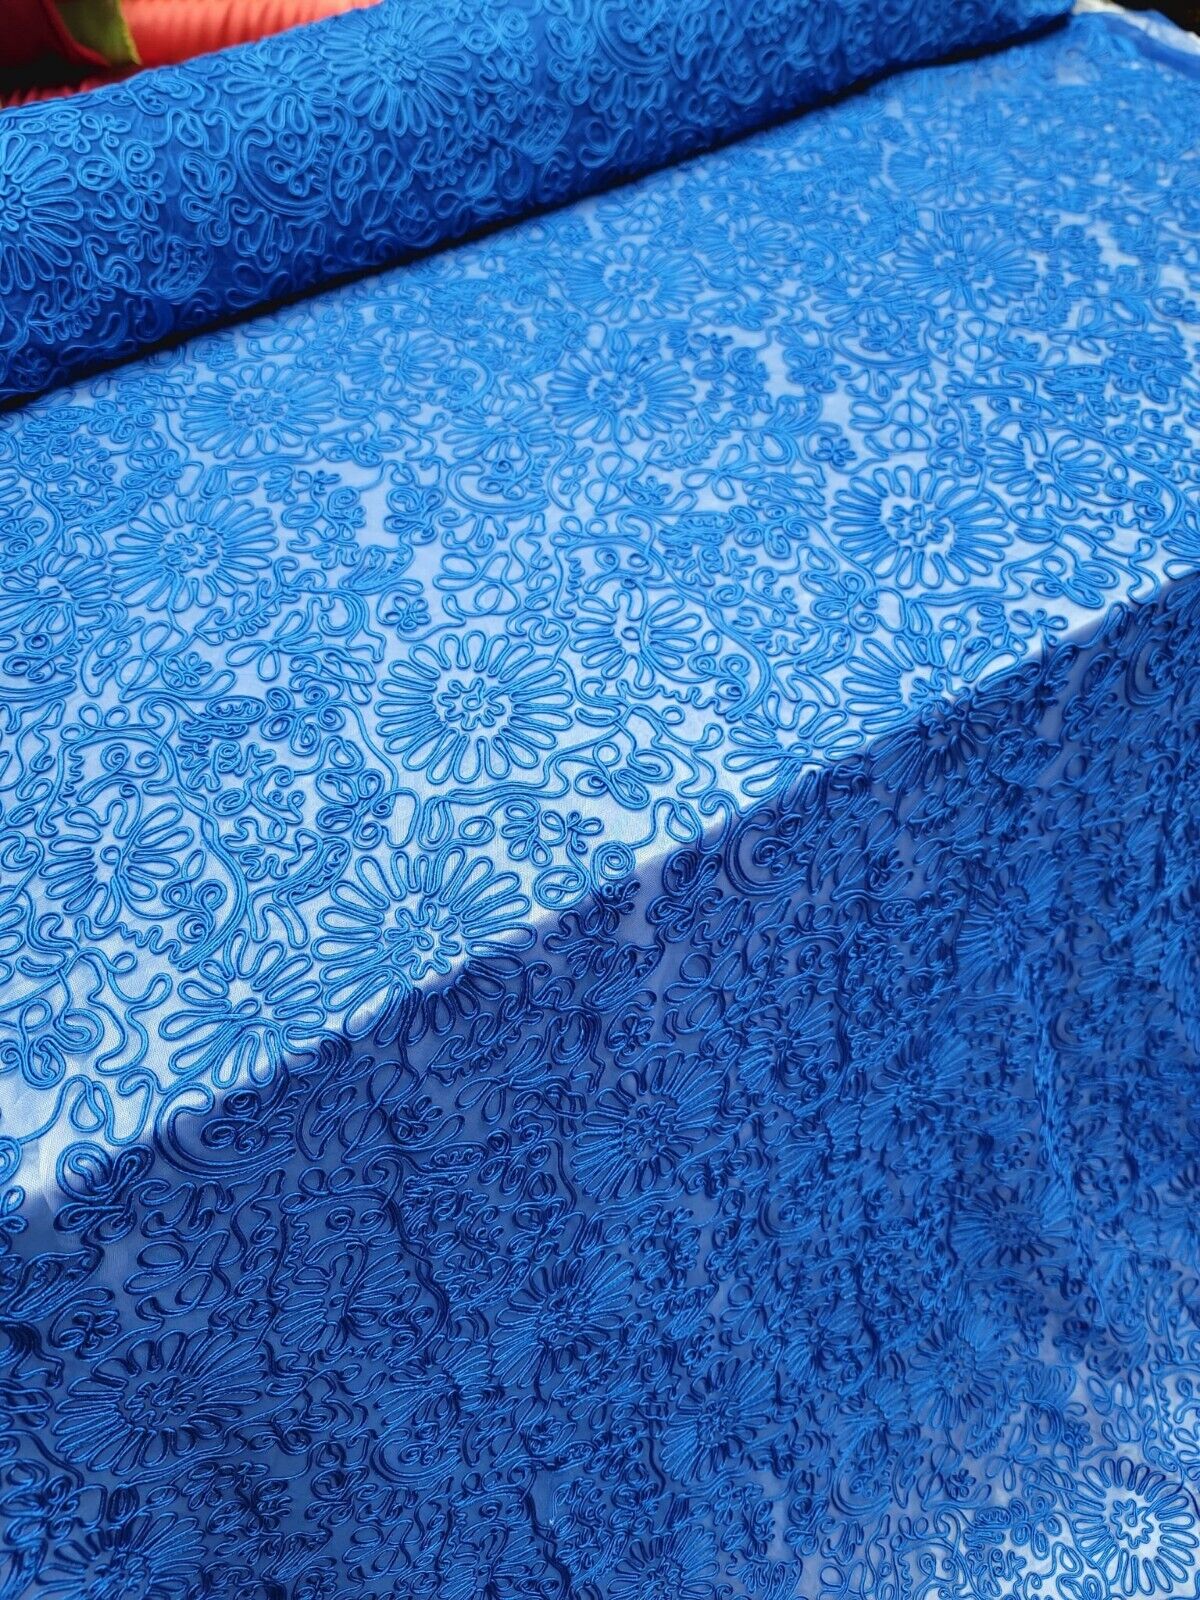 Royal Blue Lace Fabric - 56" Width - Sold by the Yard - Embroidery Cord Floral Flowers